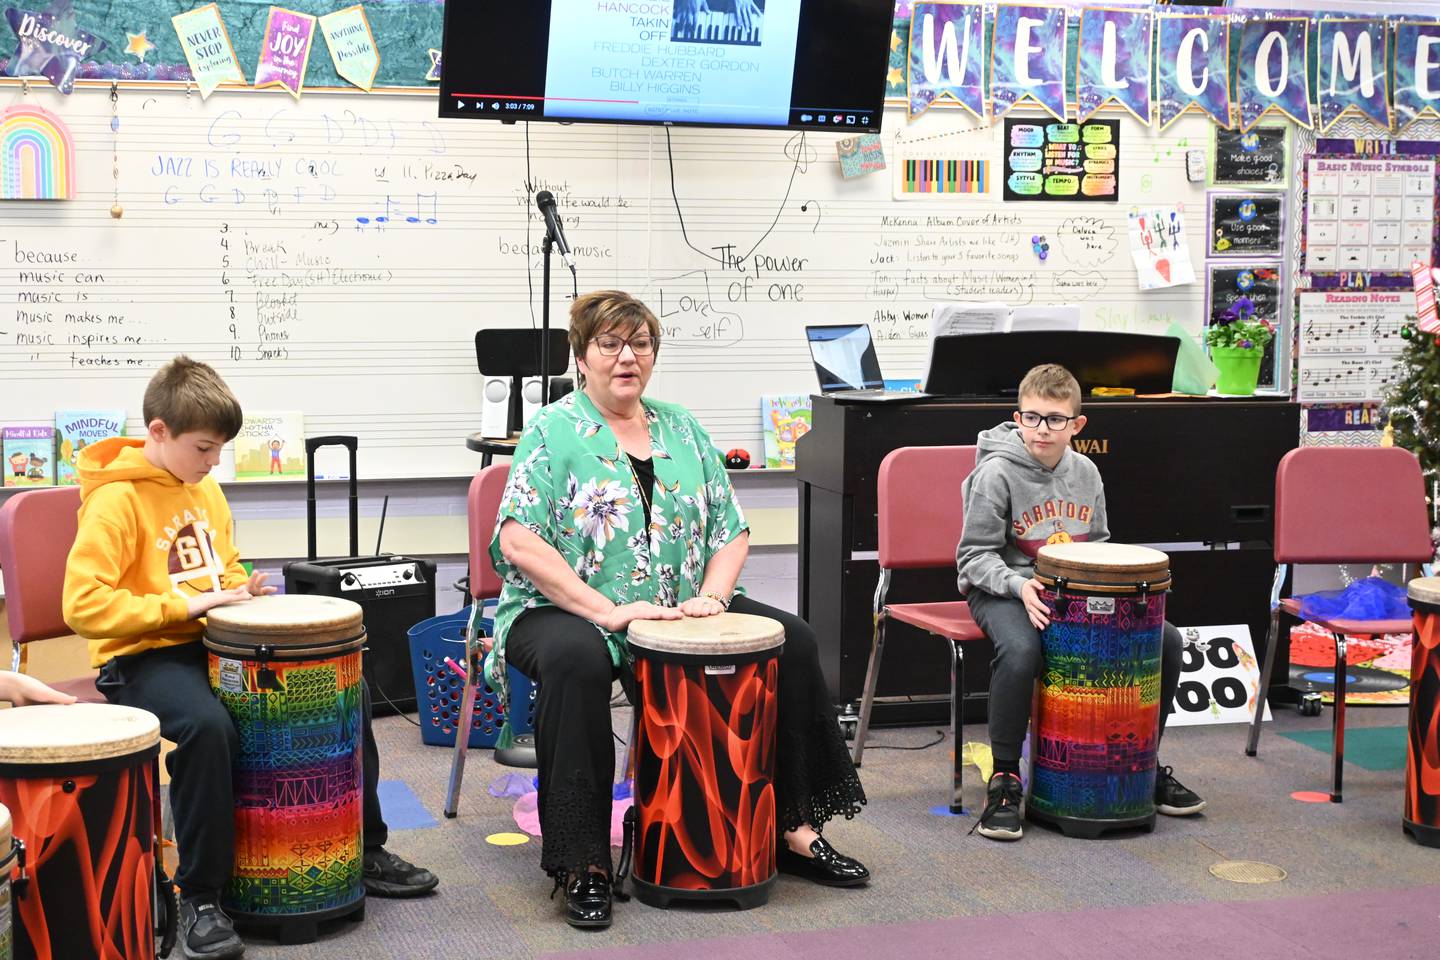 Struck uses her classroom for more than just teaching music for her music is culture and she strives to bring those concepts to her students. To have them travel the world from inside her classroom, each day.